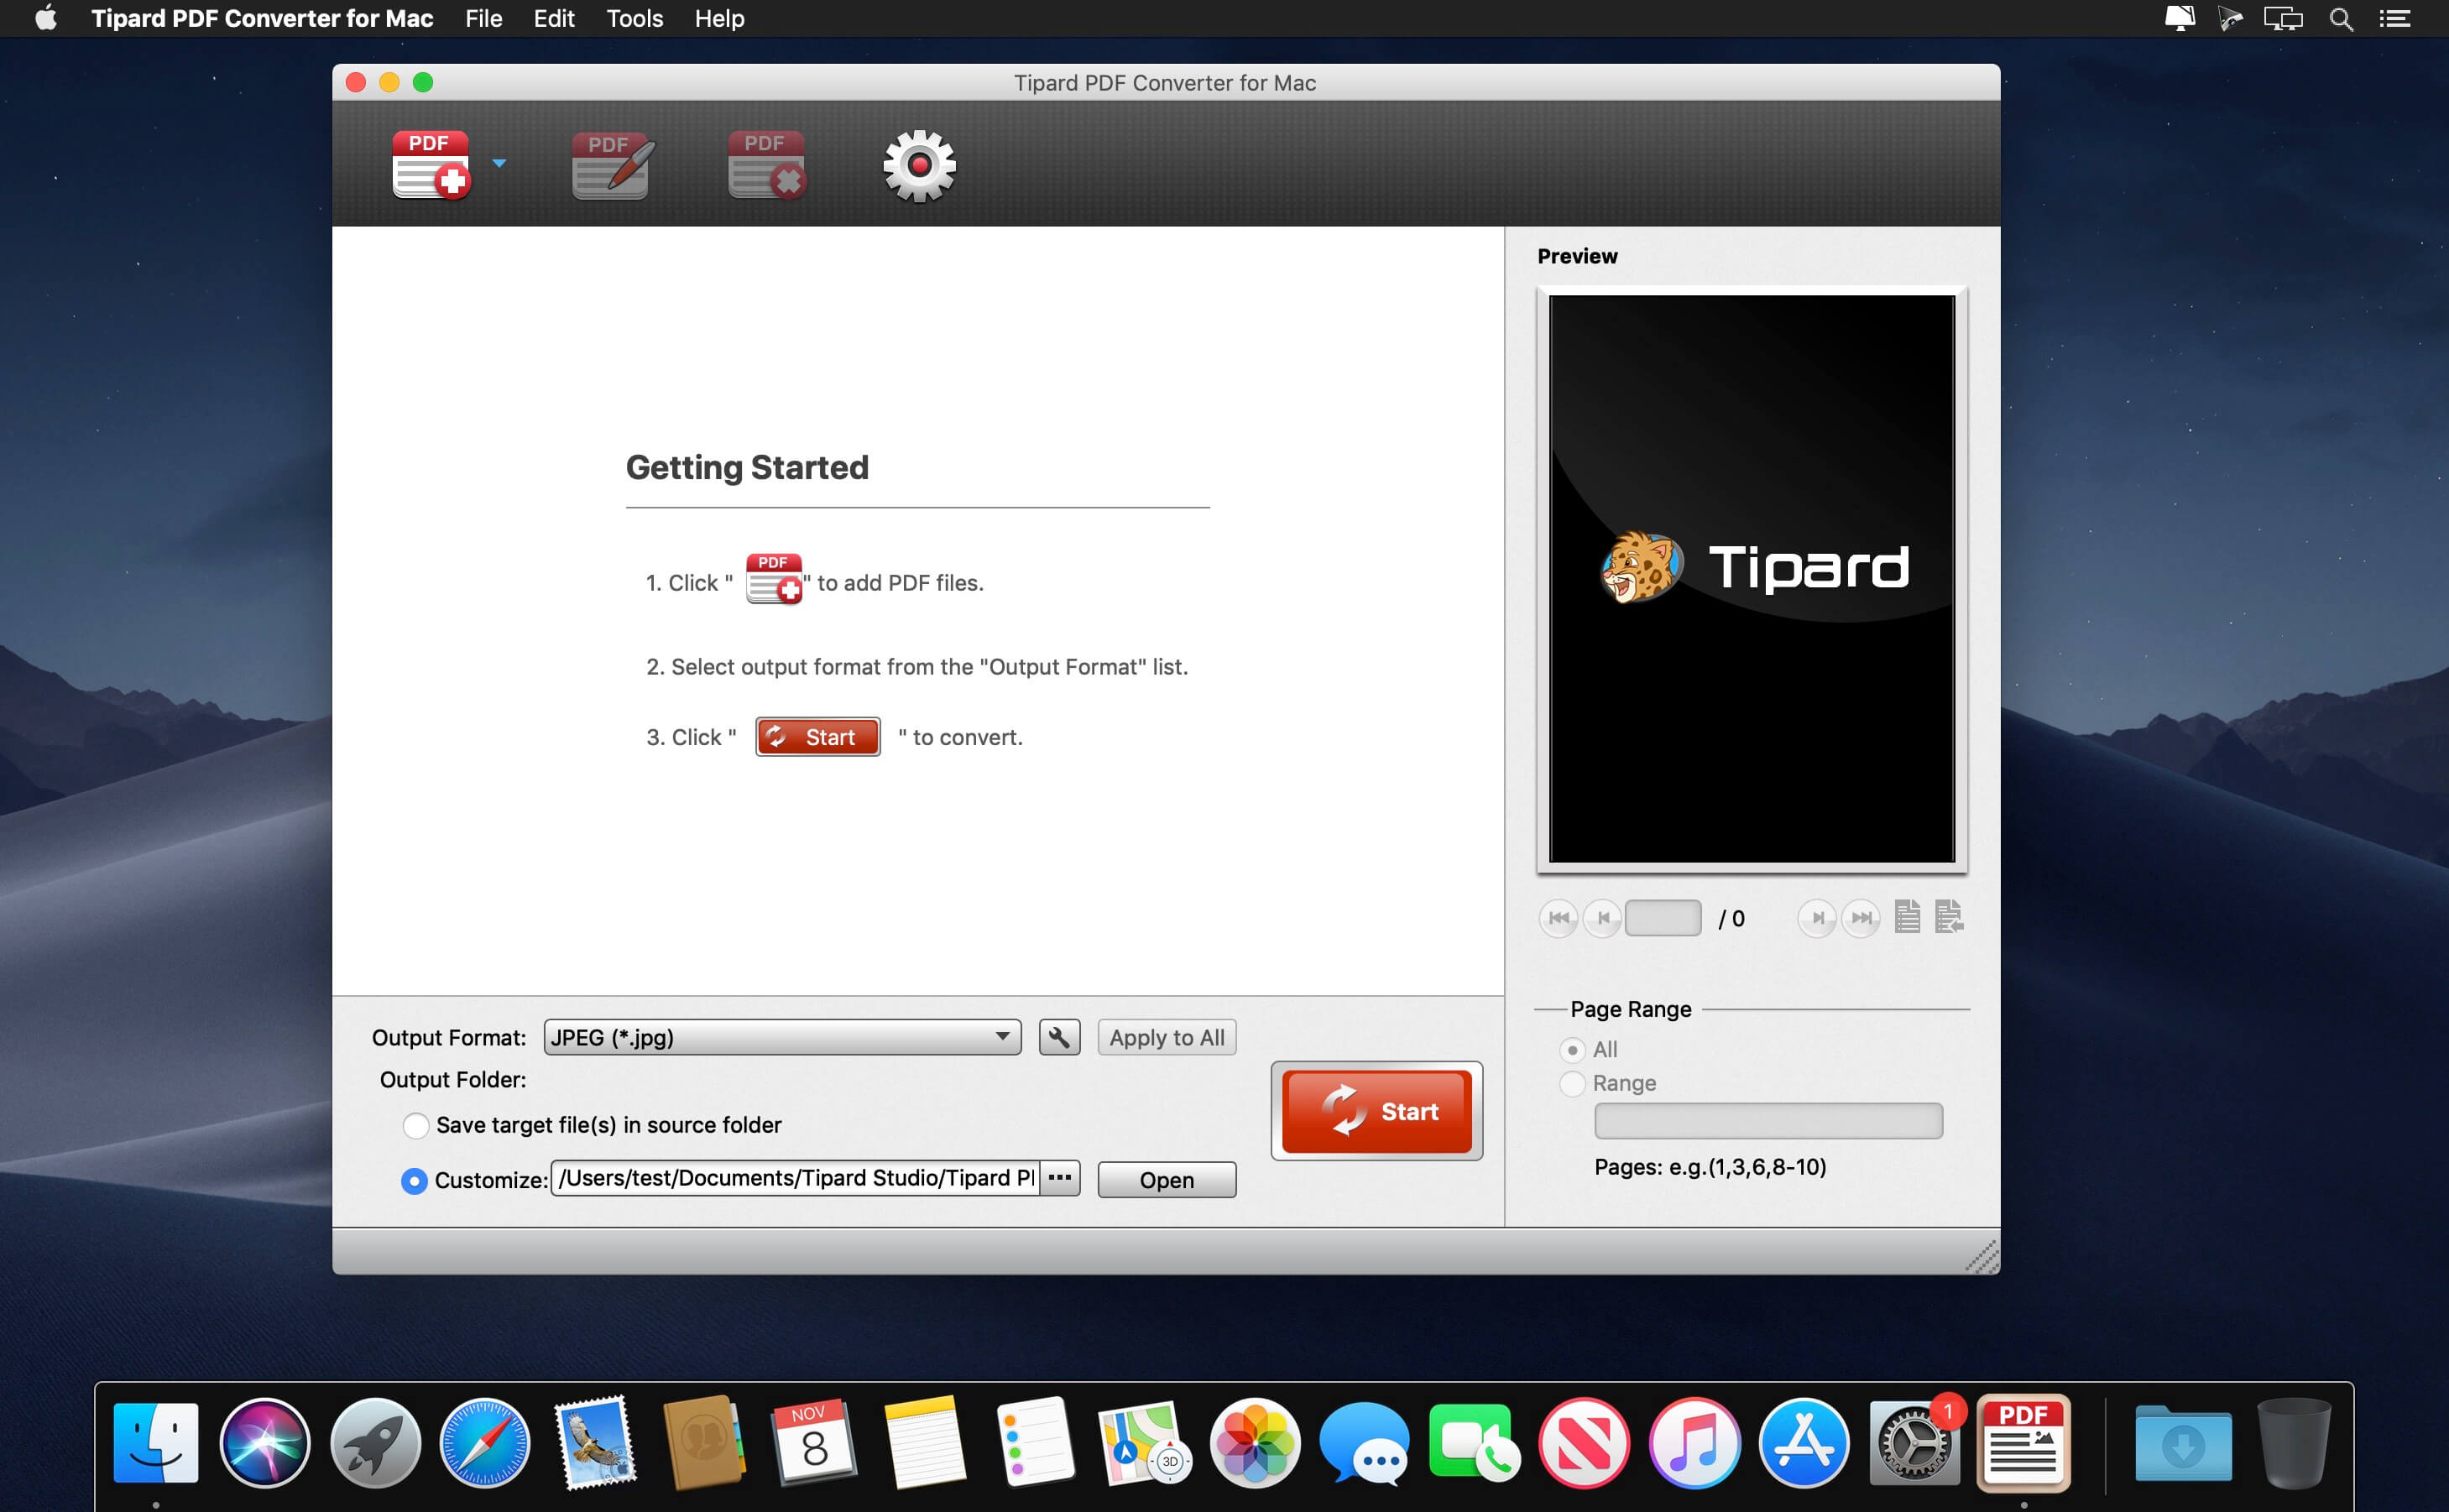 Tipard Blu-ray Converter 10.1.8 download the new version for apple